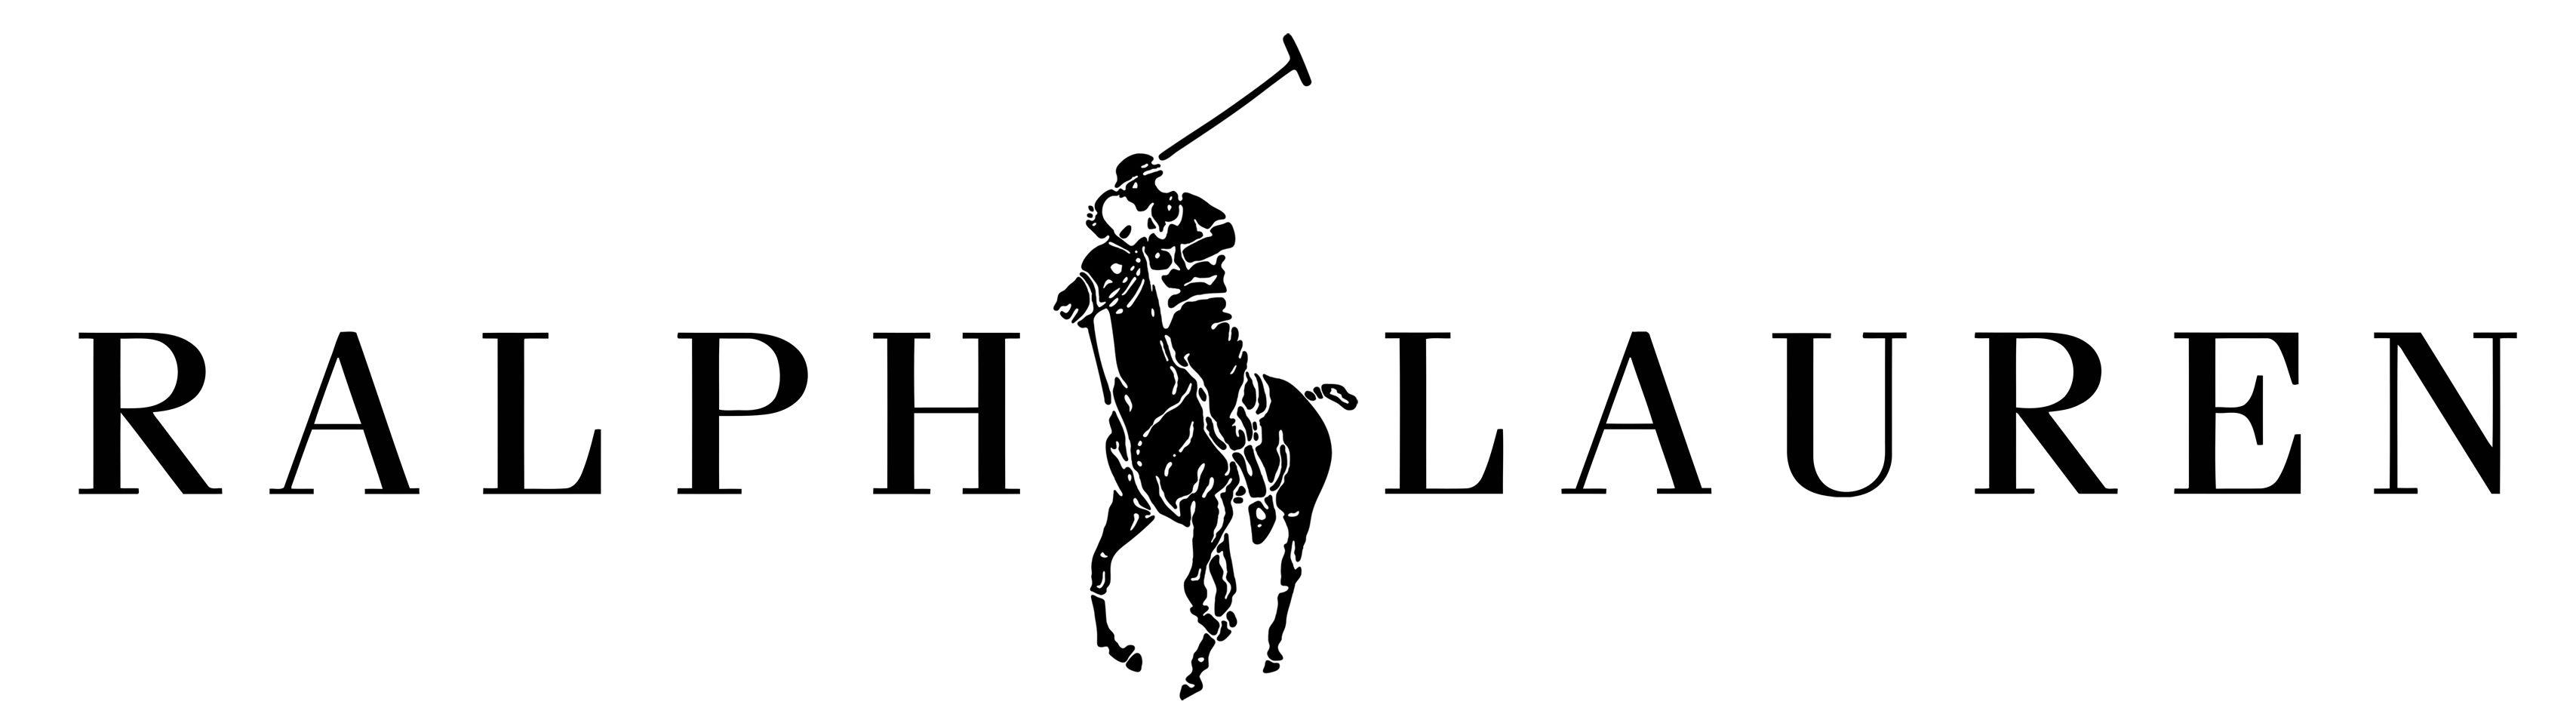 Ralph Lauren Polo Logo - Ralph Lauren Logo, Ralph Lauren Symbol, Meaning, History and Evolution